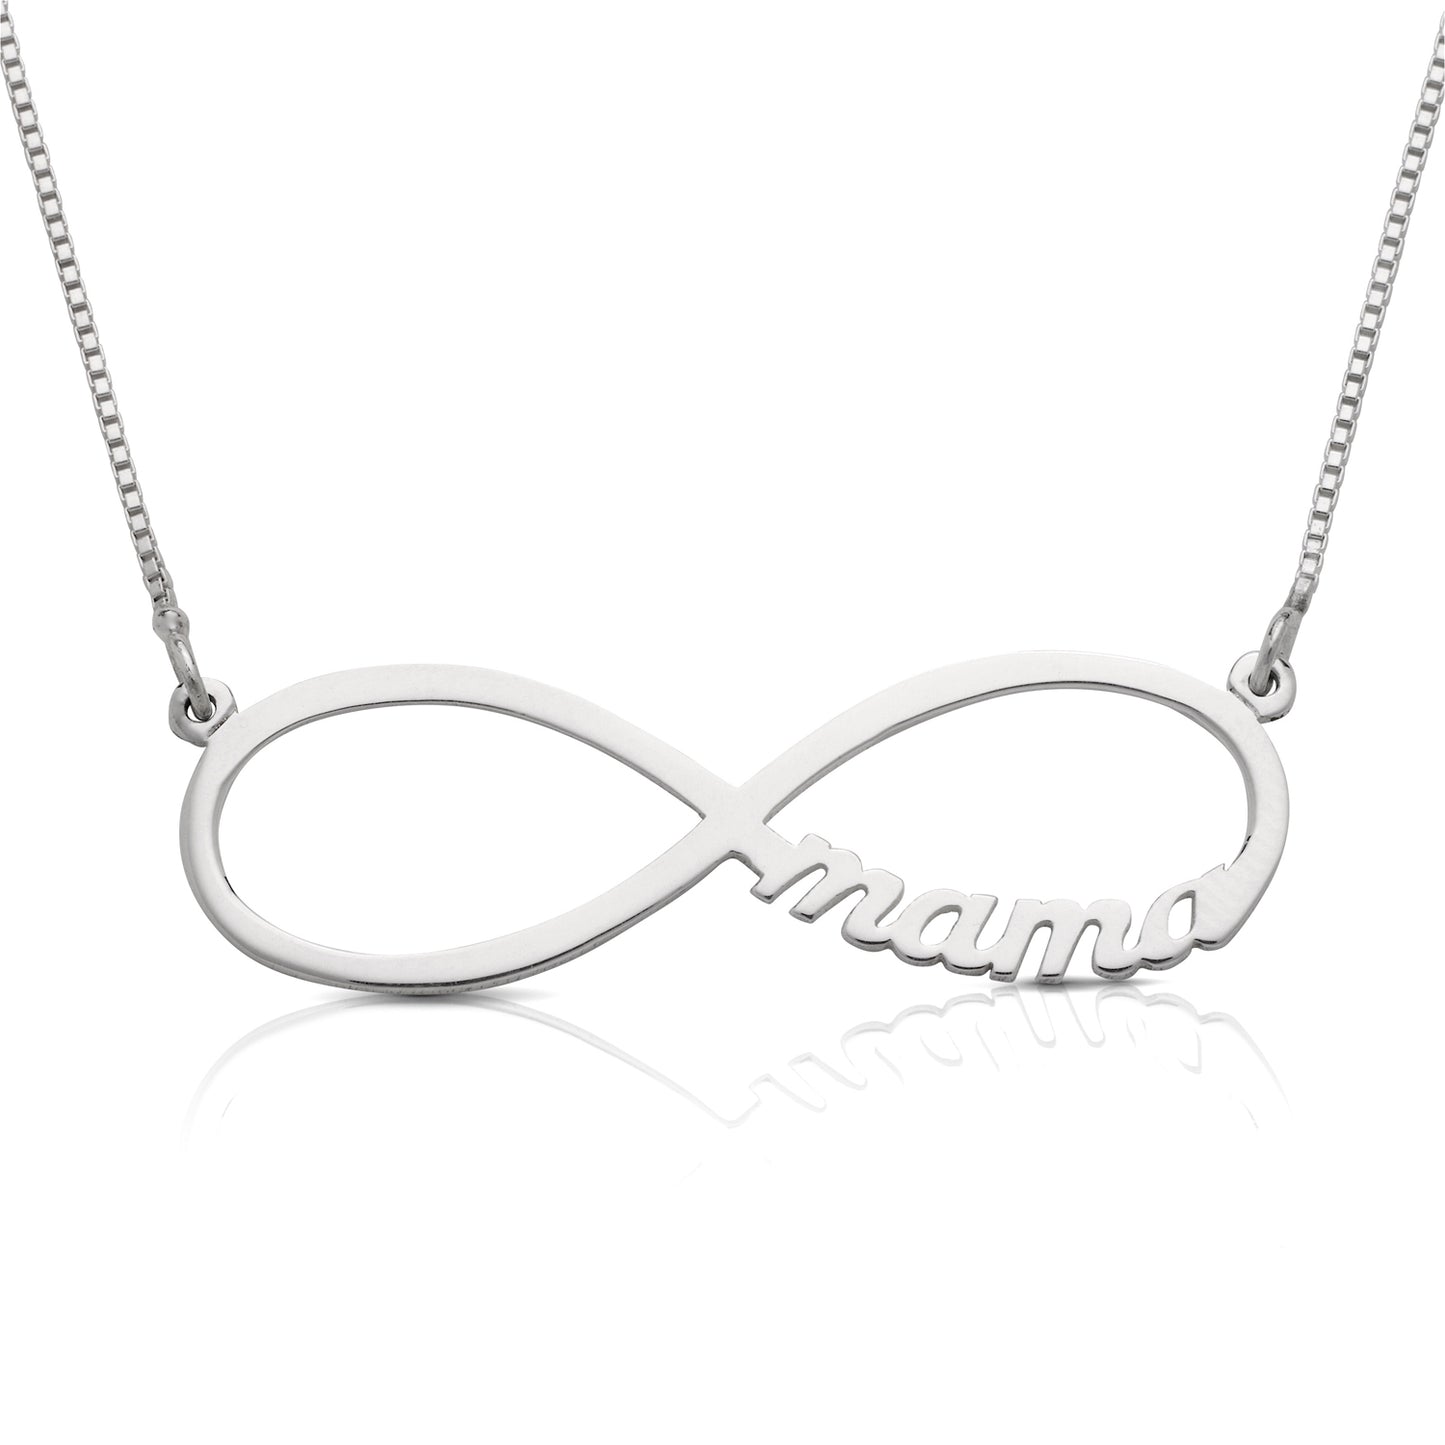 Better Jewelry Personalized .925 Sterling Silver Infinity Sign Name Necklace (MADE IN USA)